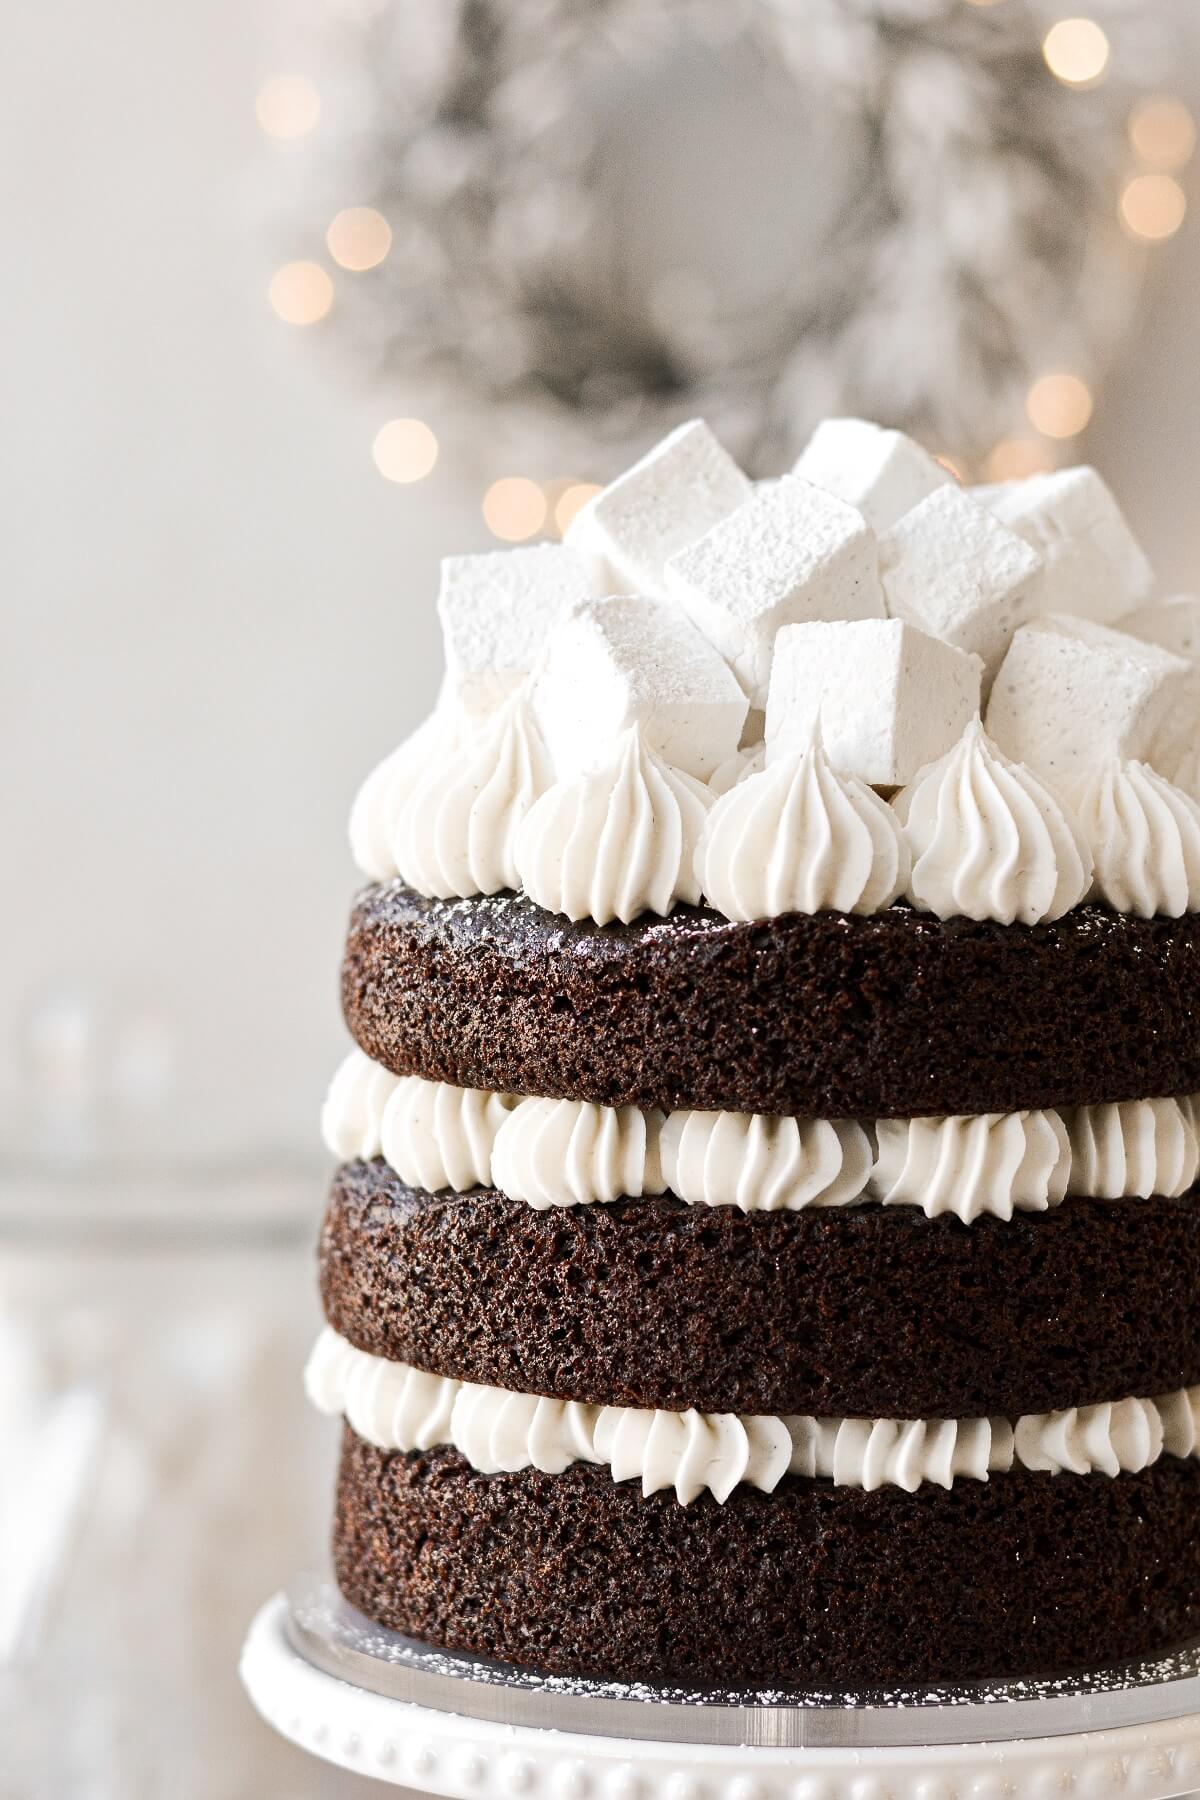 A hot chocolate cake with naked layers of dark chocolate cake, piped buttercream, and homemade marshmallows, with a lighted Christmas wreath in the background.